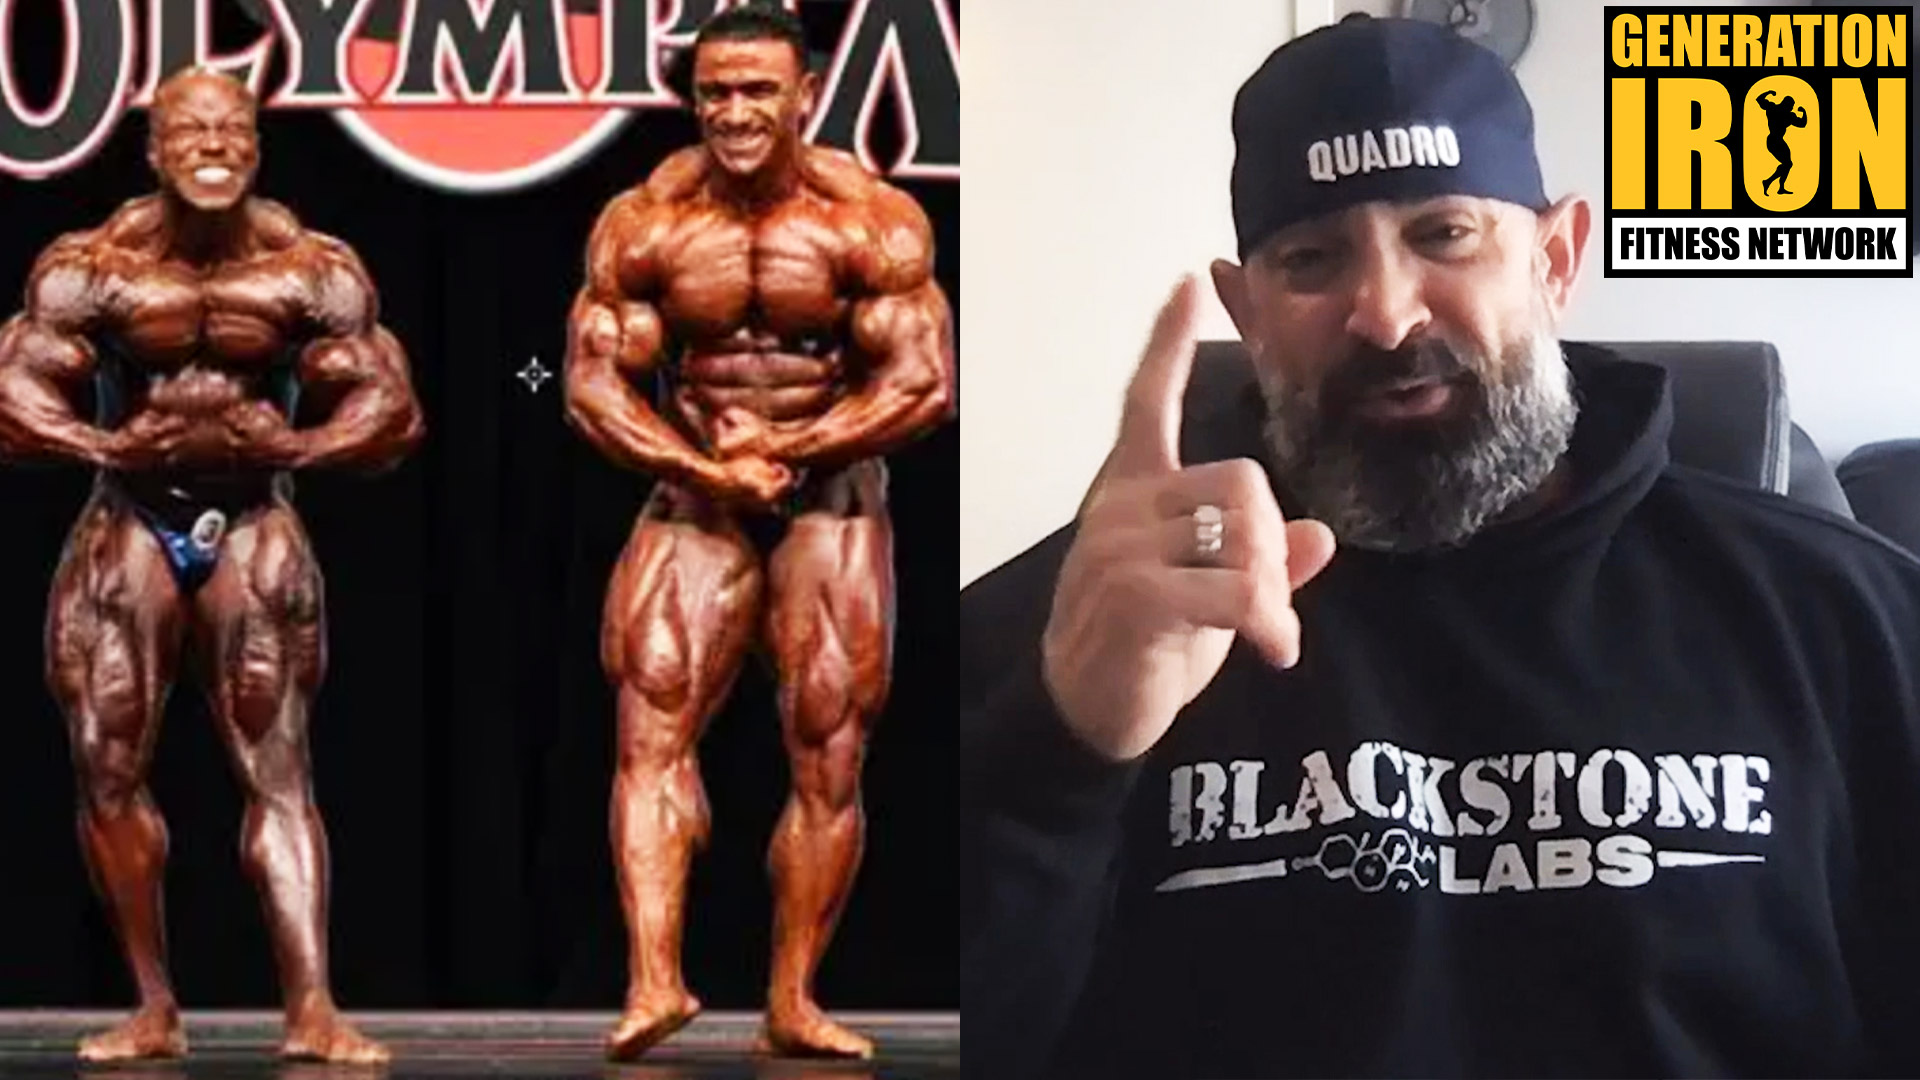 Guy Cisternino: “An Open Olympia Would Never Lose To A Men’s 212 Olympia”